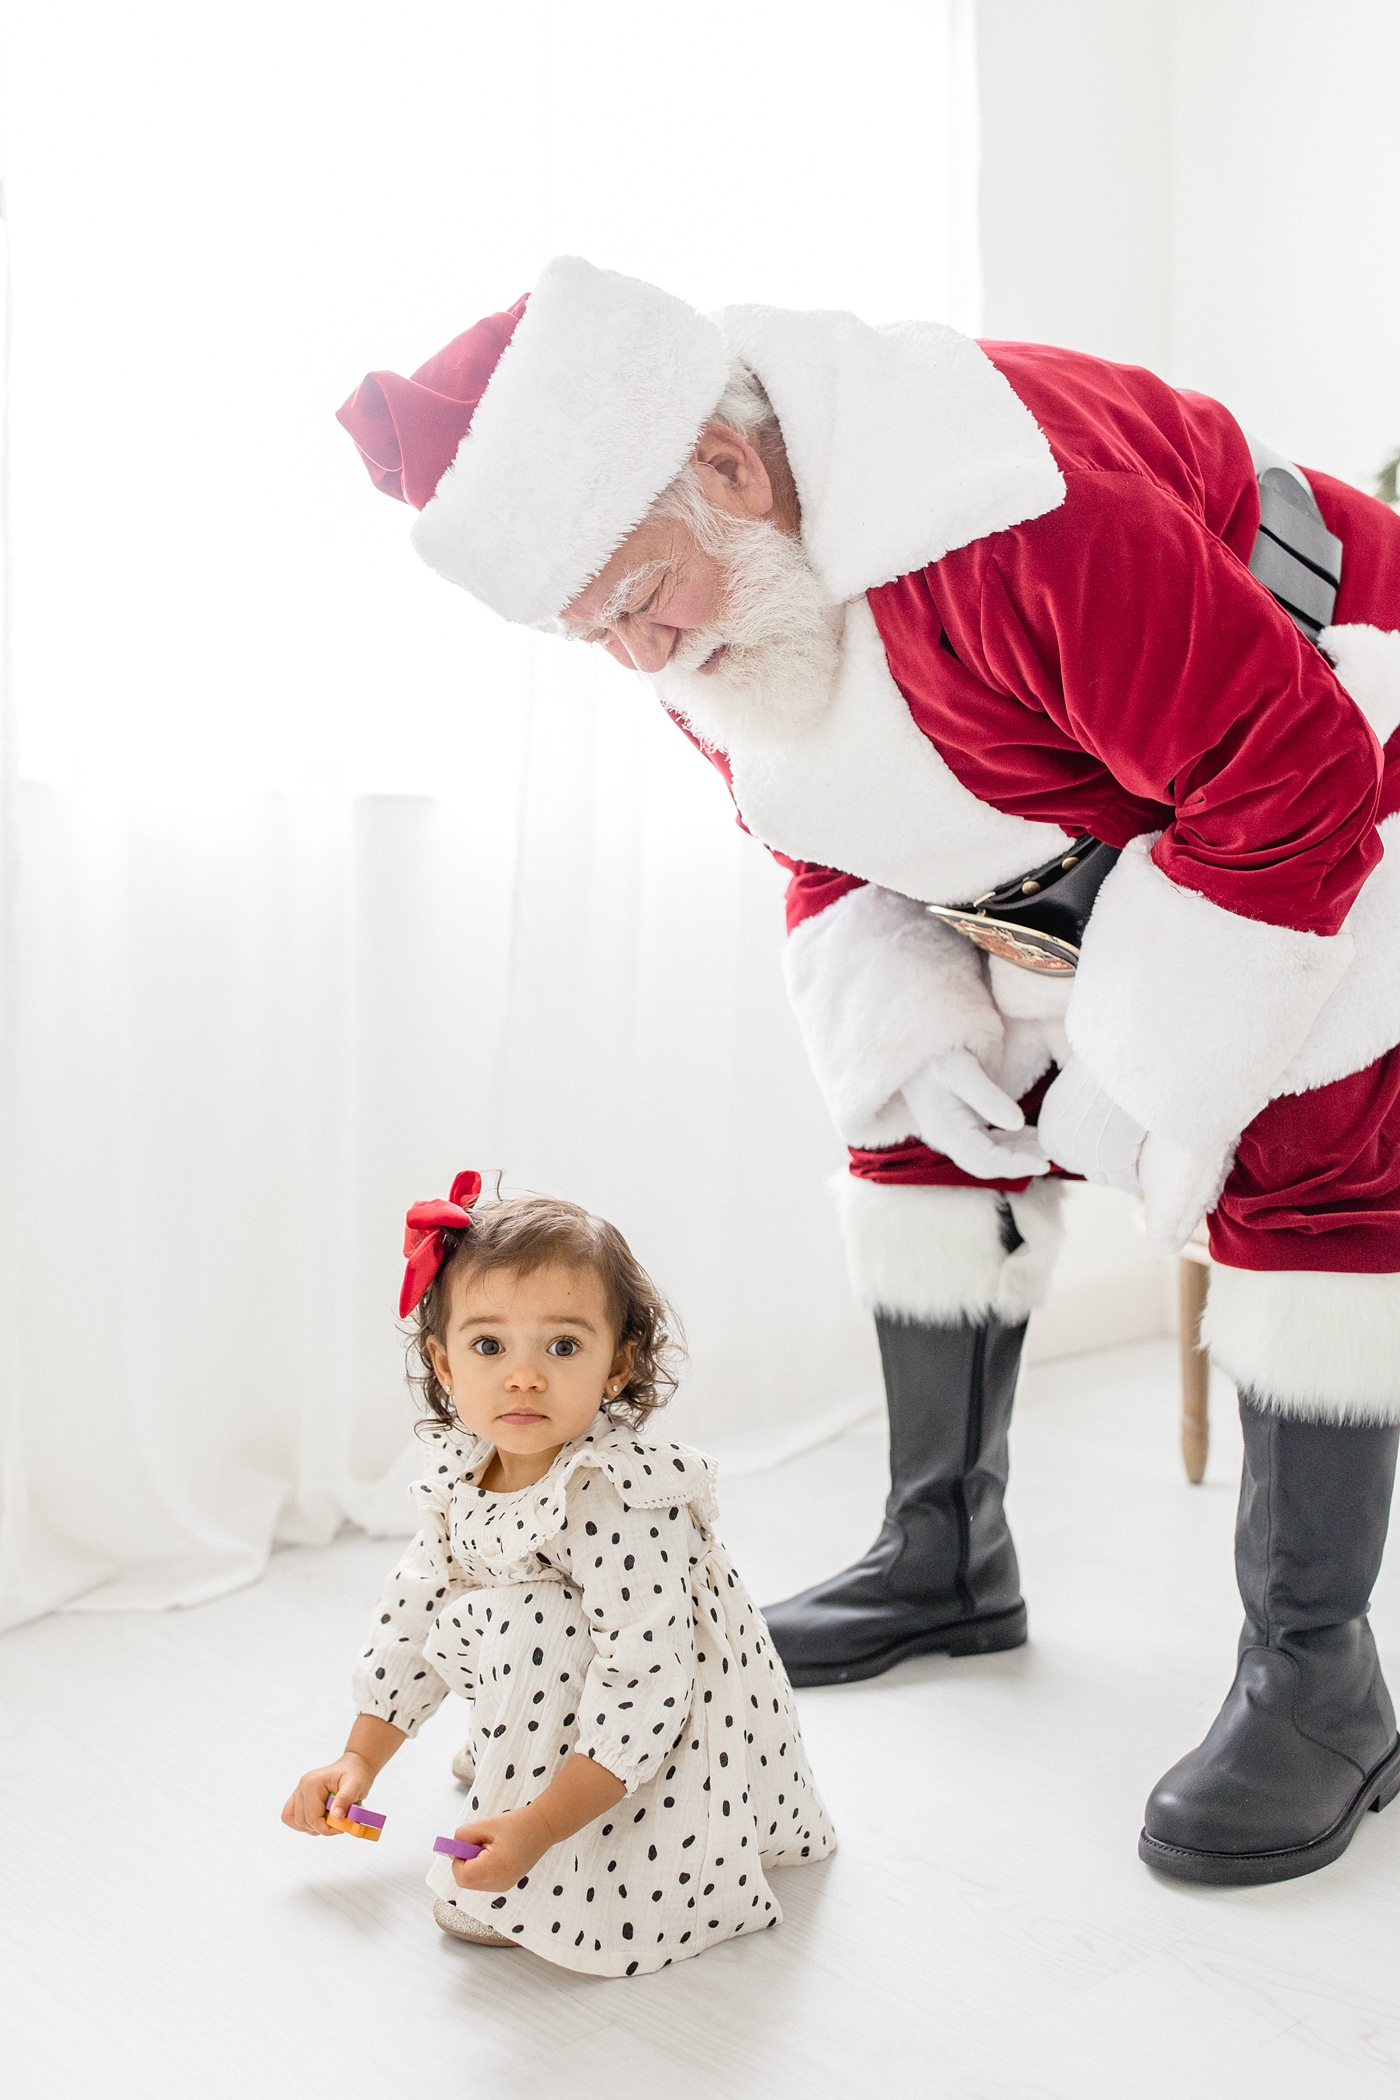 Santa Claus watches over little girl during Miami studio session. Photo by Ivanna Vidal Photography.